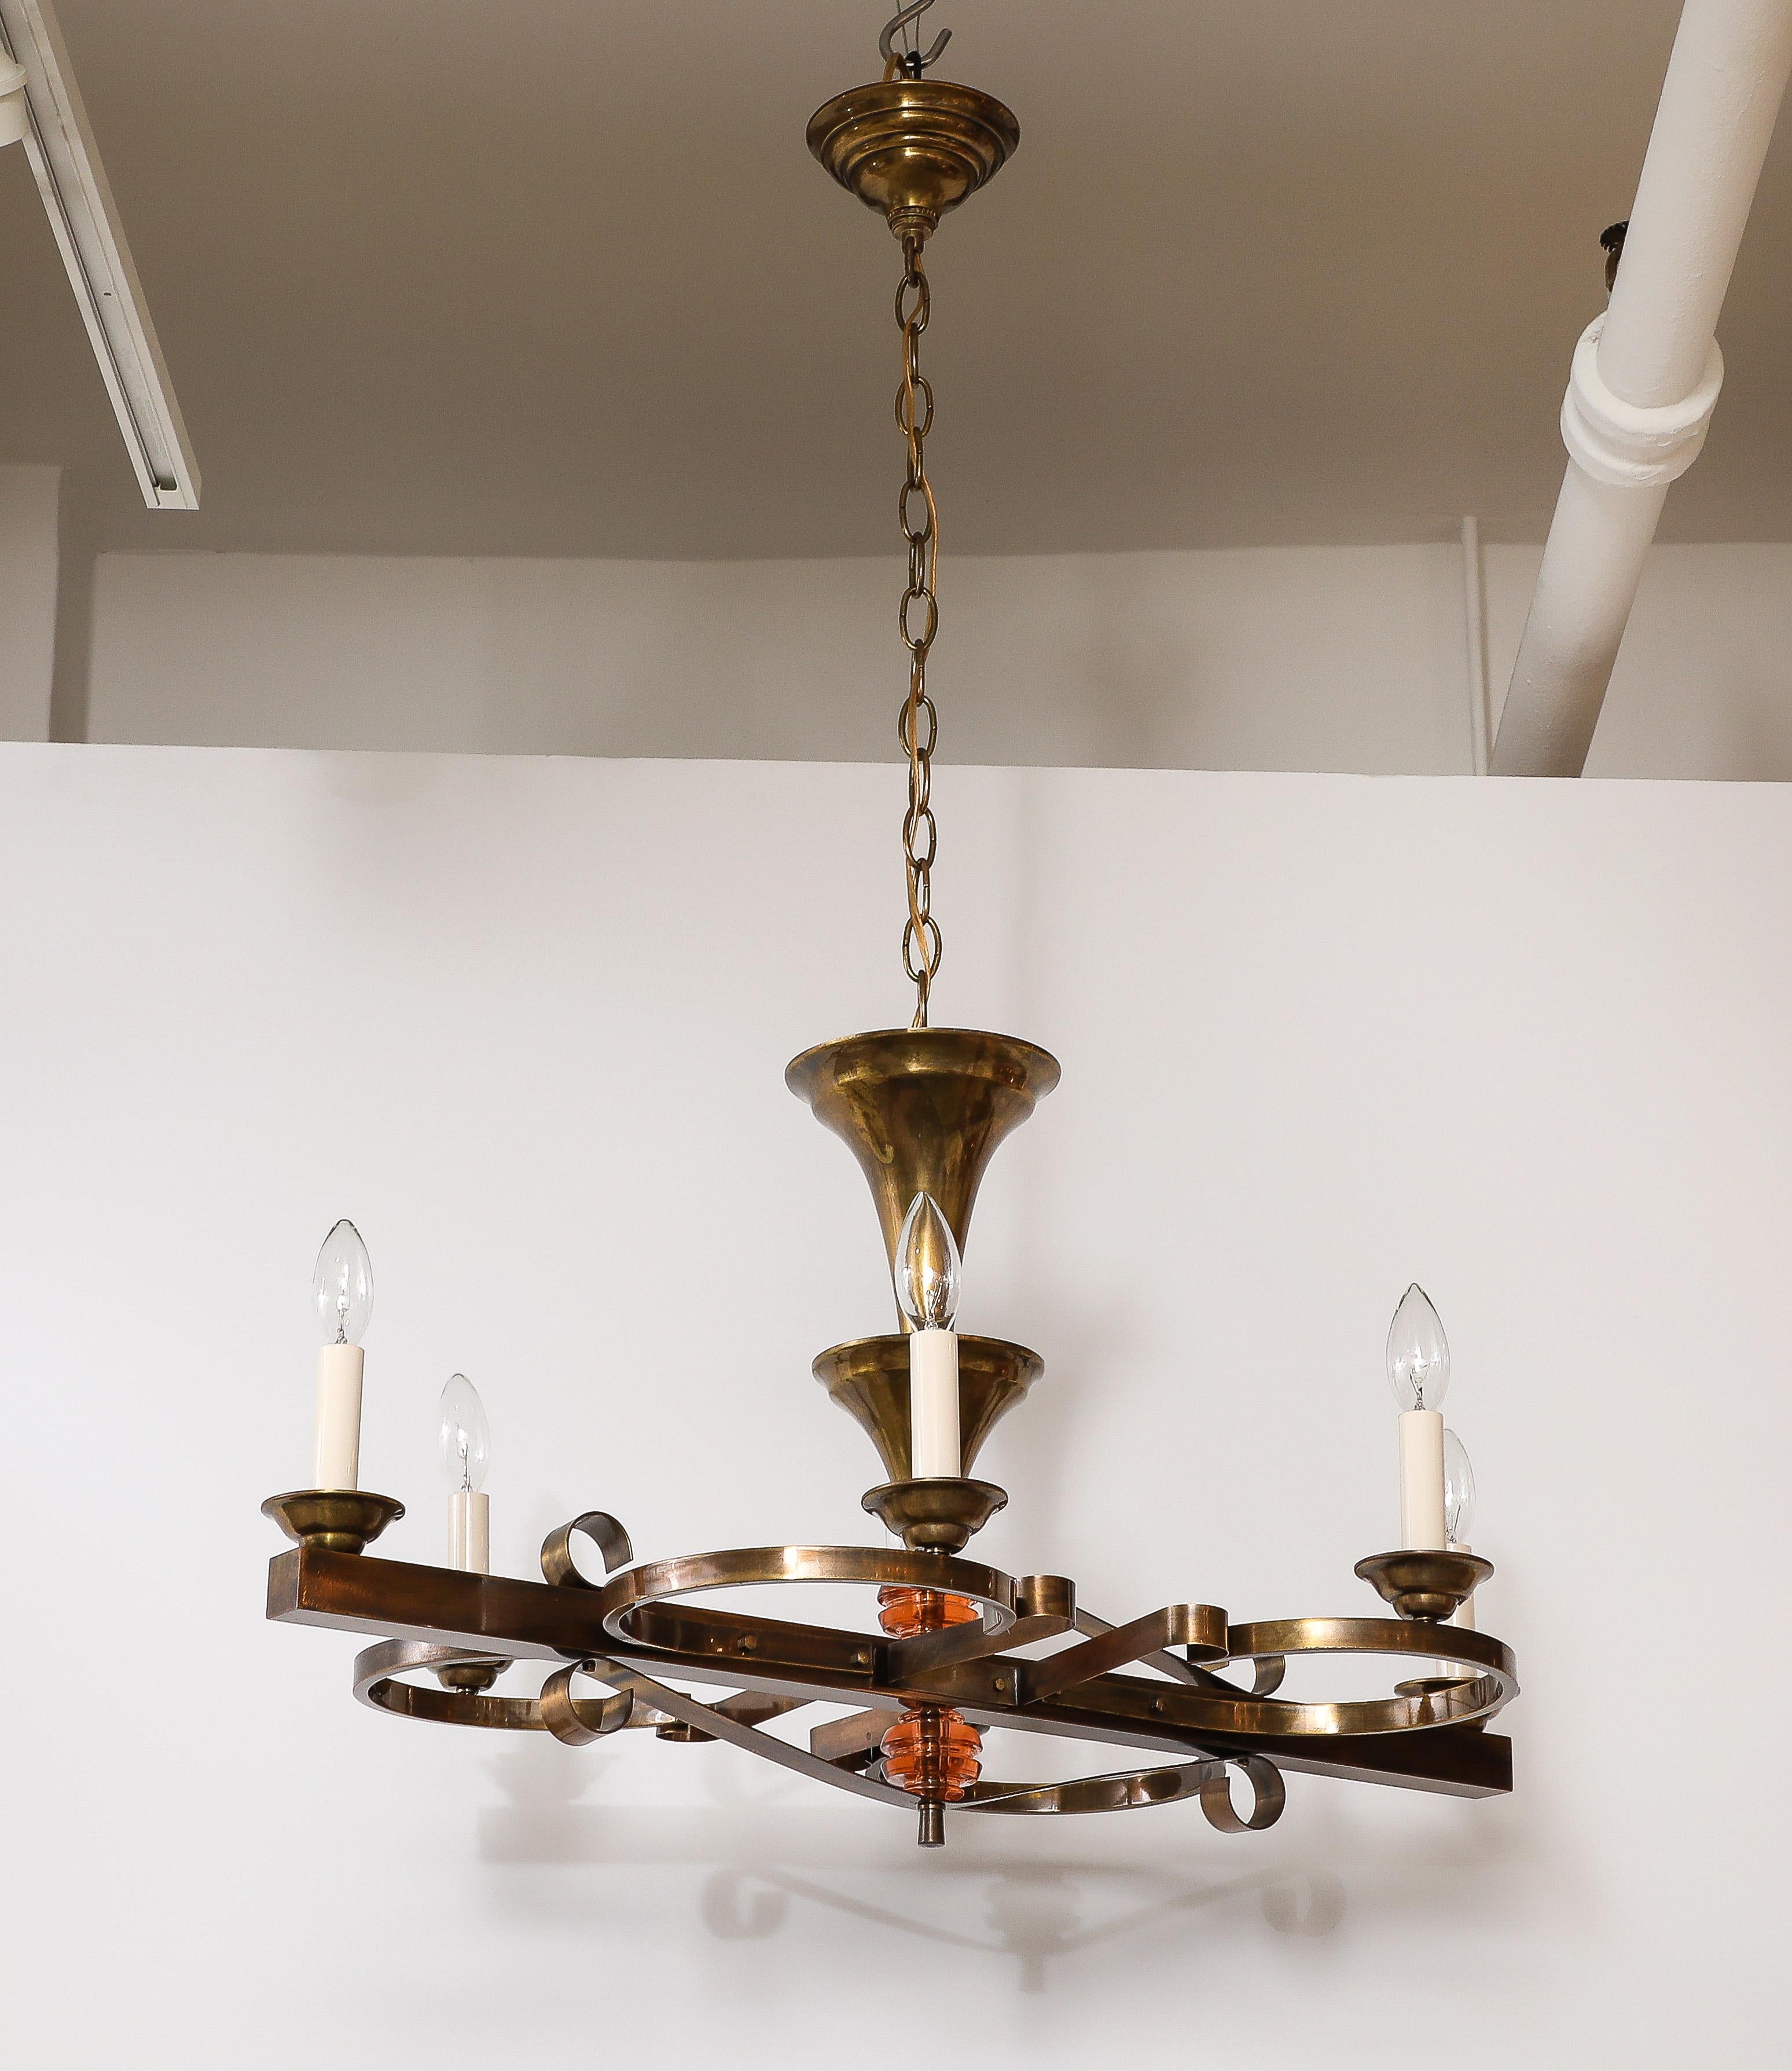 1940's French Art-Deco 6 Arm Brass Chandelier For Sale 4